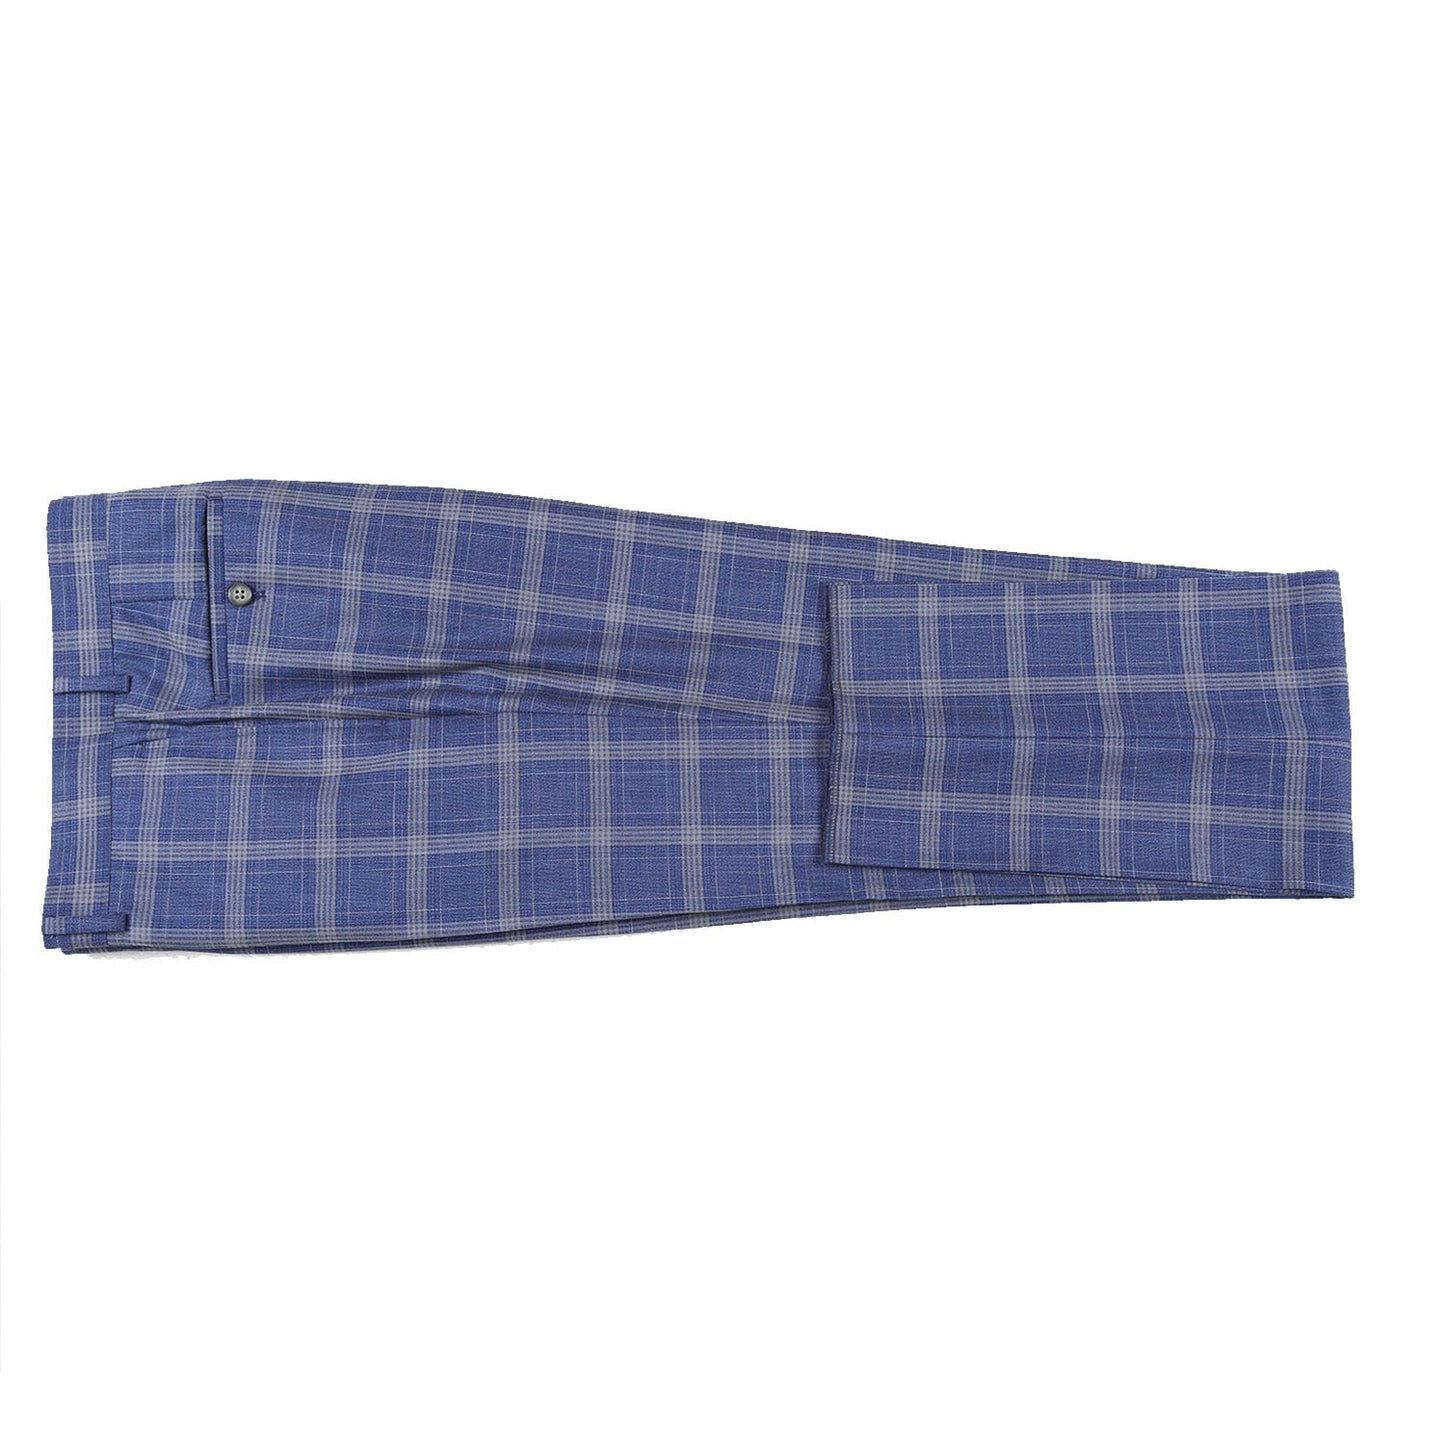 82-60-400EL Slim Fit English Laundry Blue with Marigold Check Suit